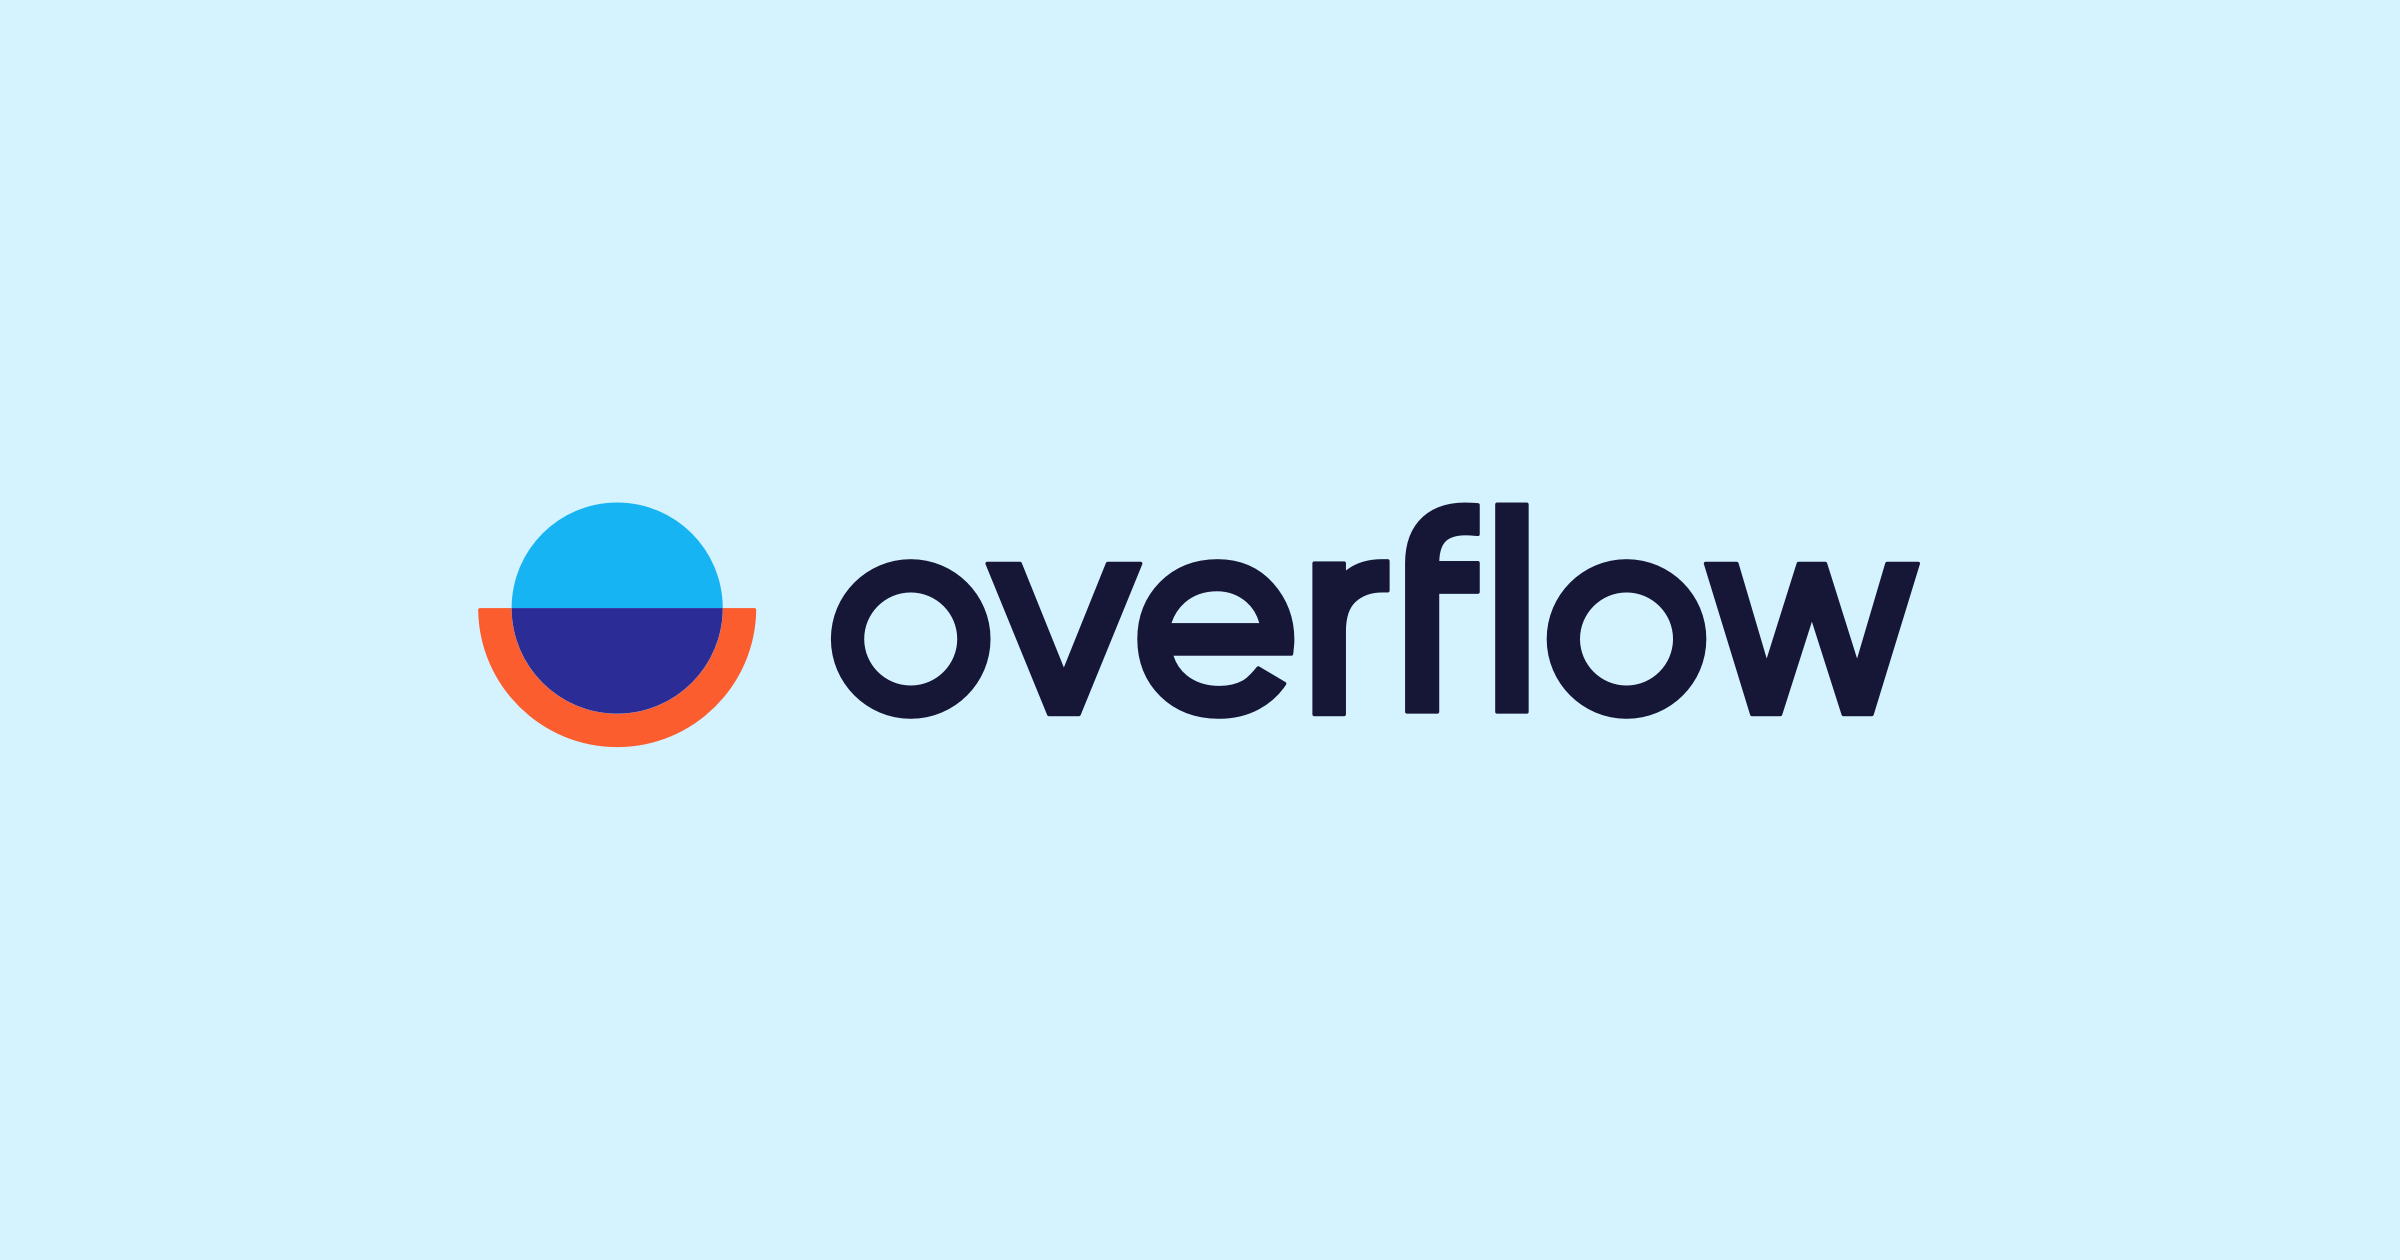 Overflow | User flows done right